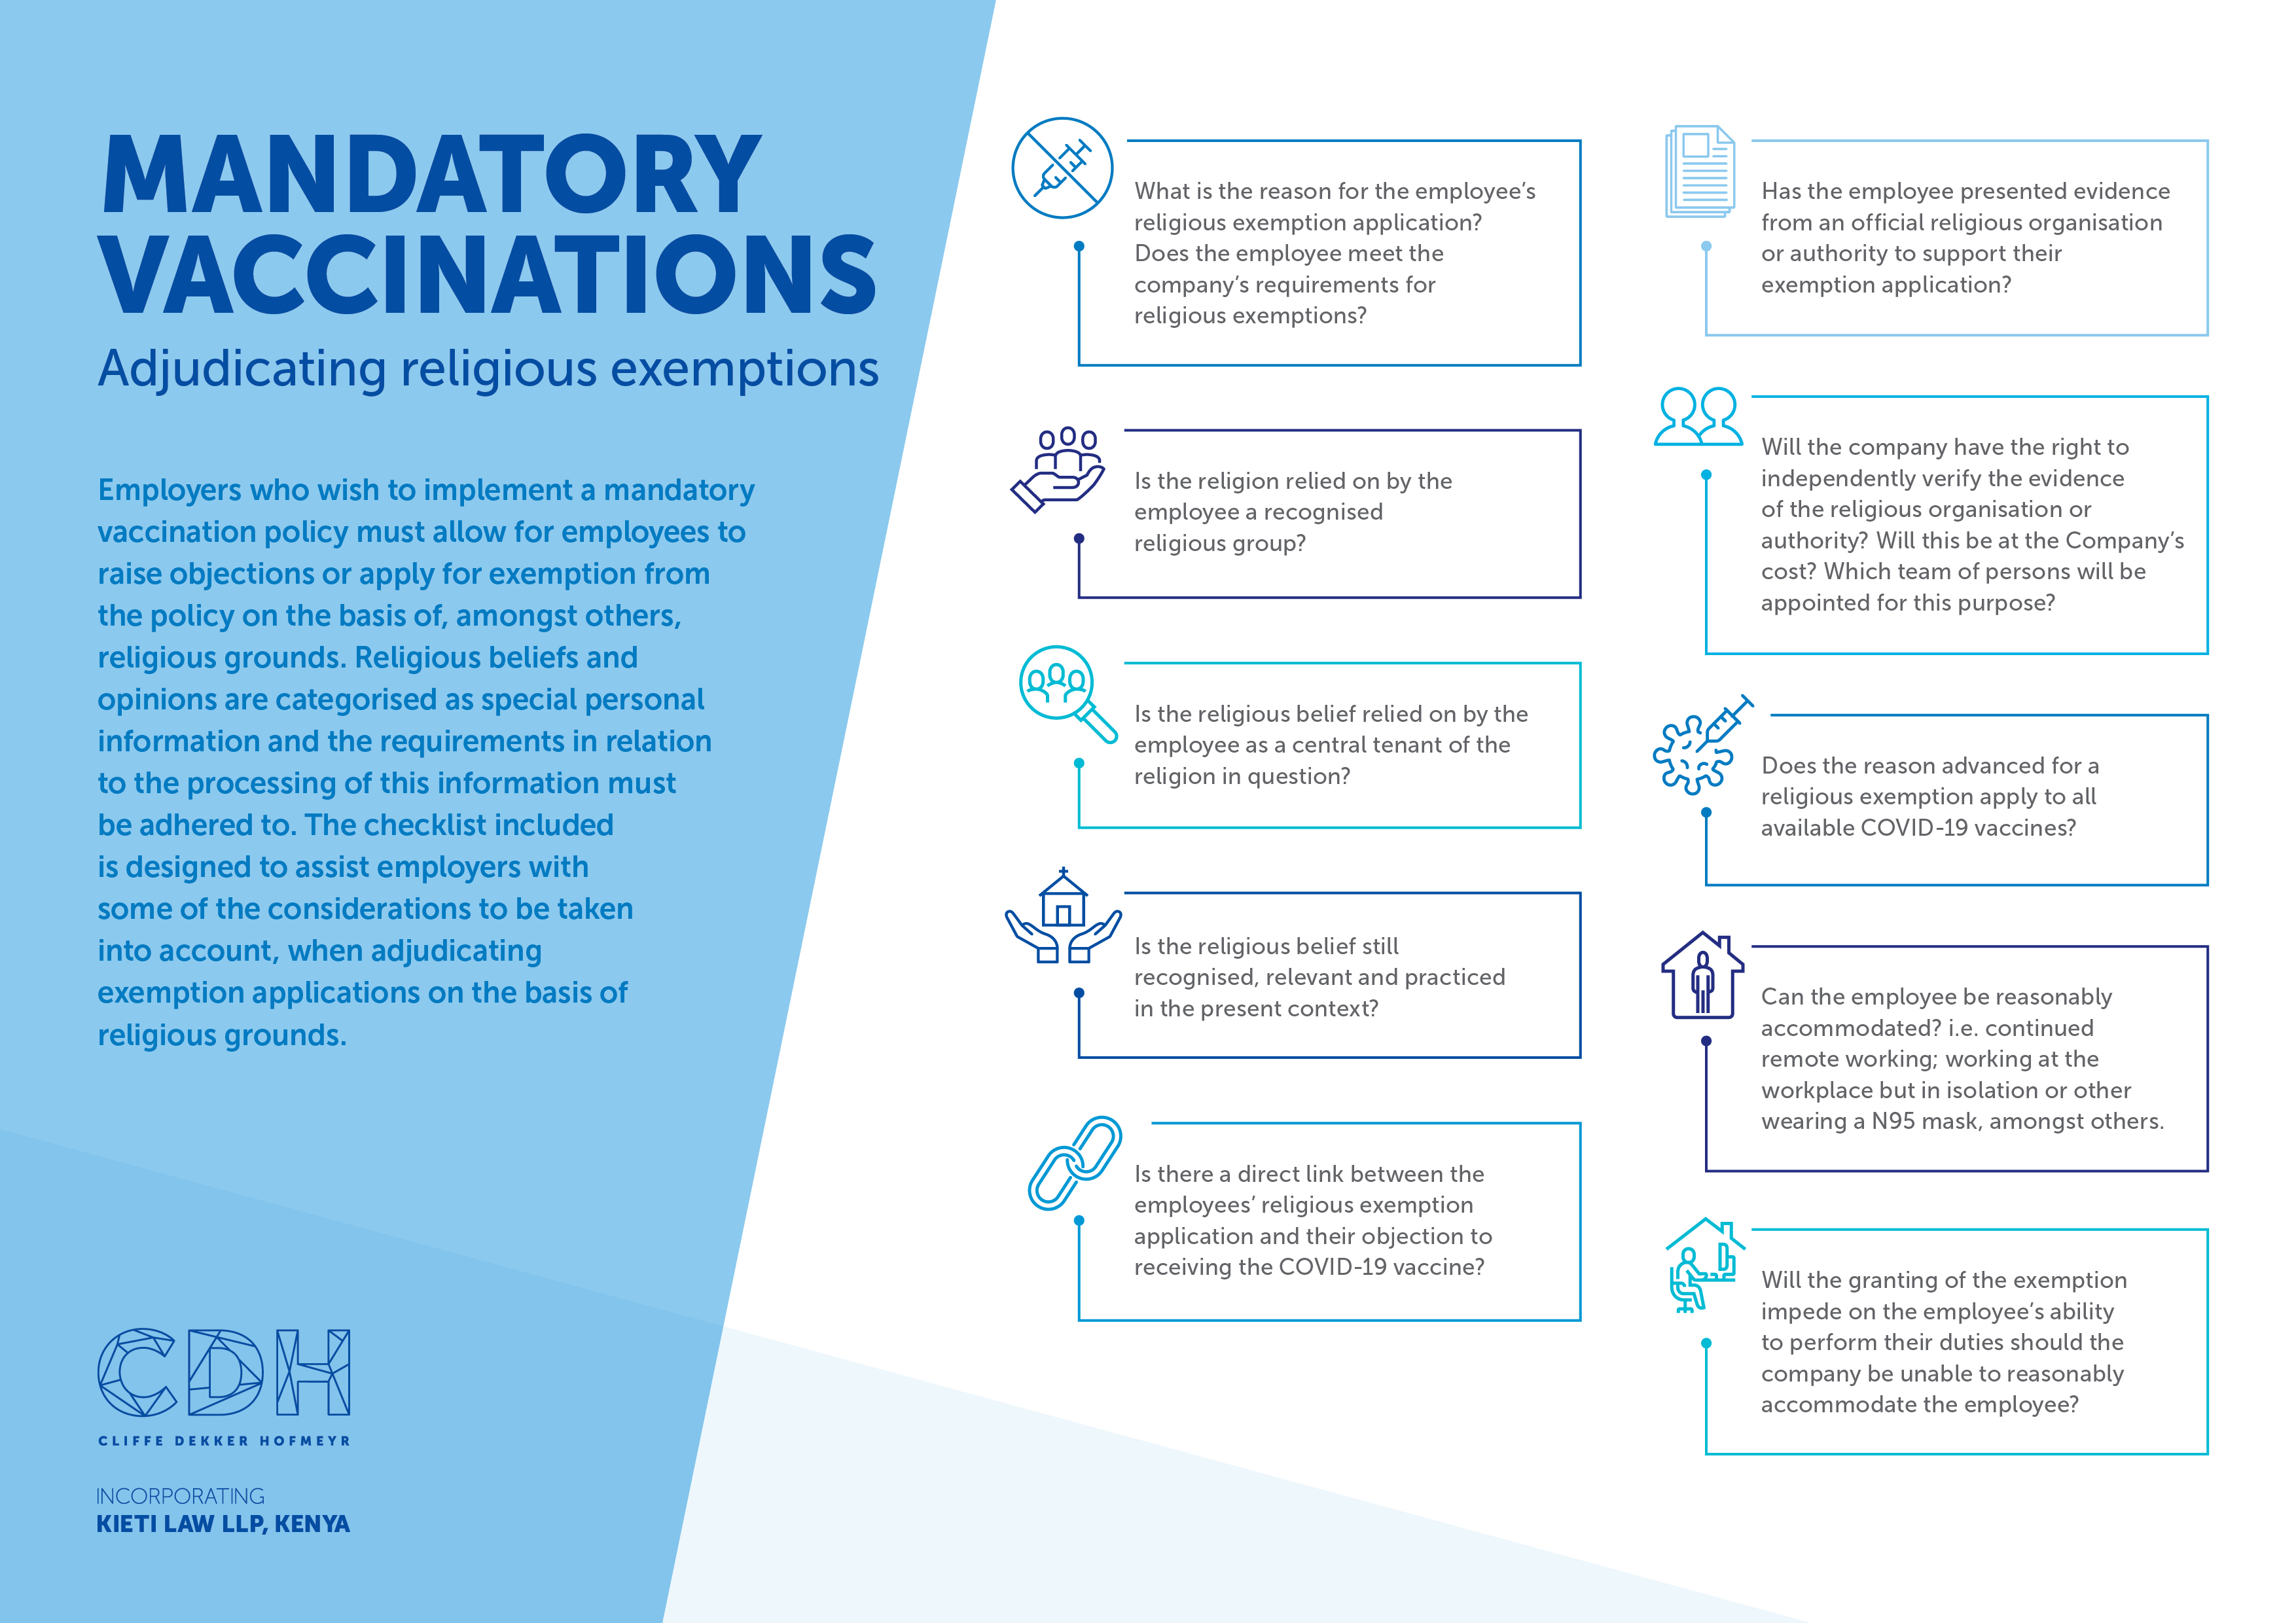 10572 INFOGRAPHIC_A4 PDF_Religious Exemption Application Considerations